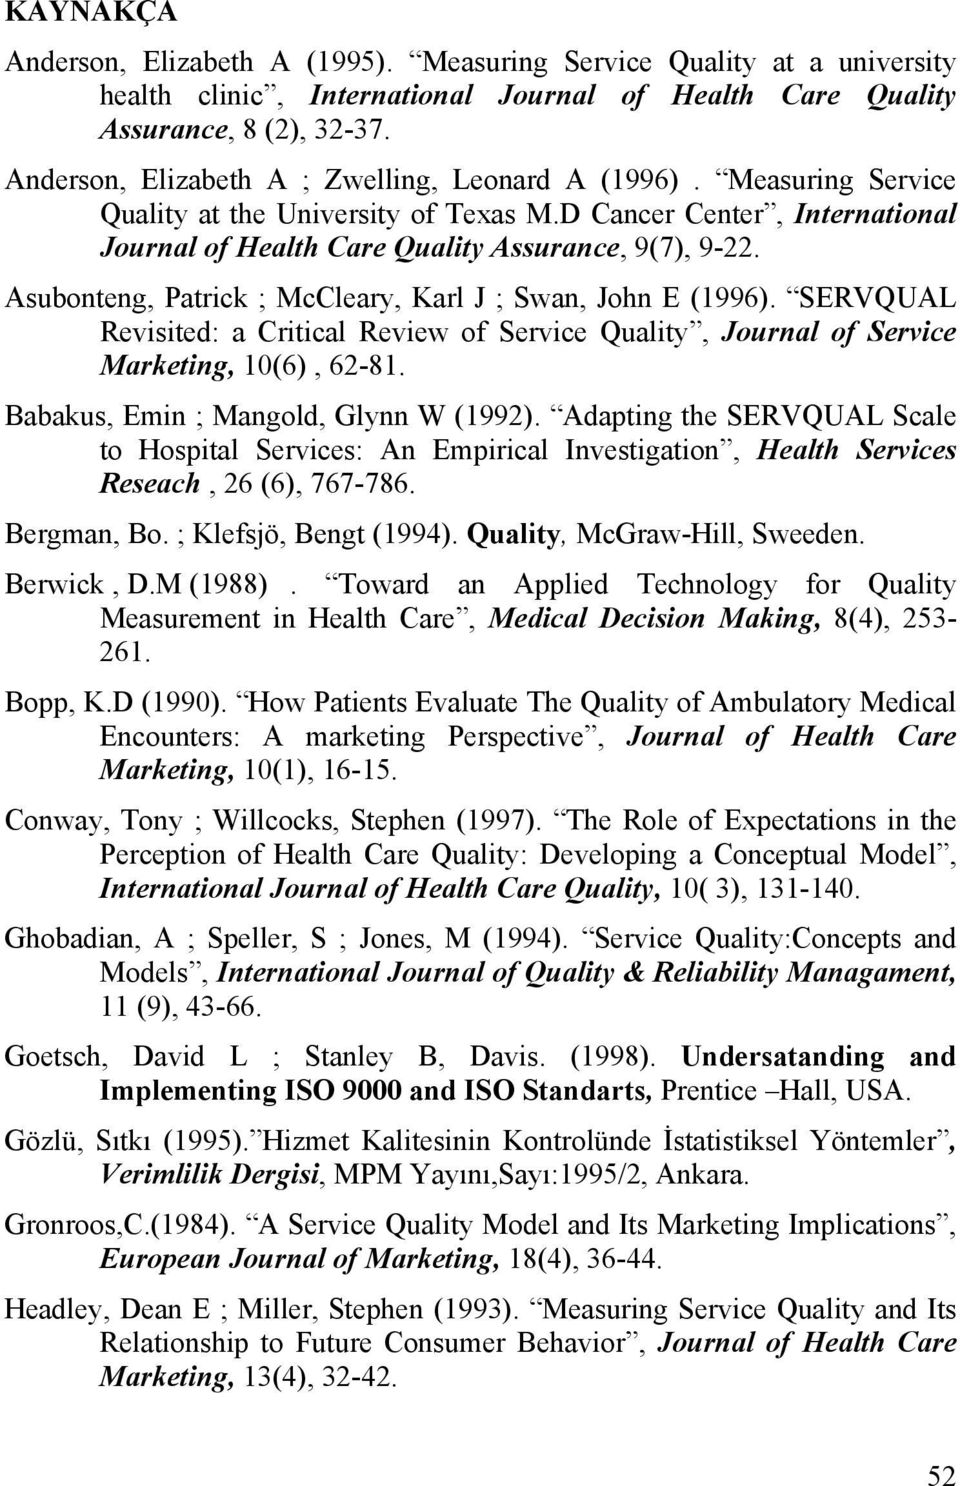 Asubonteng, Patrick ; McCleary, Karl J ; Swan, John E (1996). SERVQUAL Revisited: a Critical Review of Service Quality, Journal of Service Marketing, 10(6), 62-81.